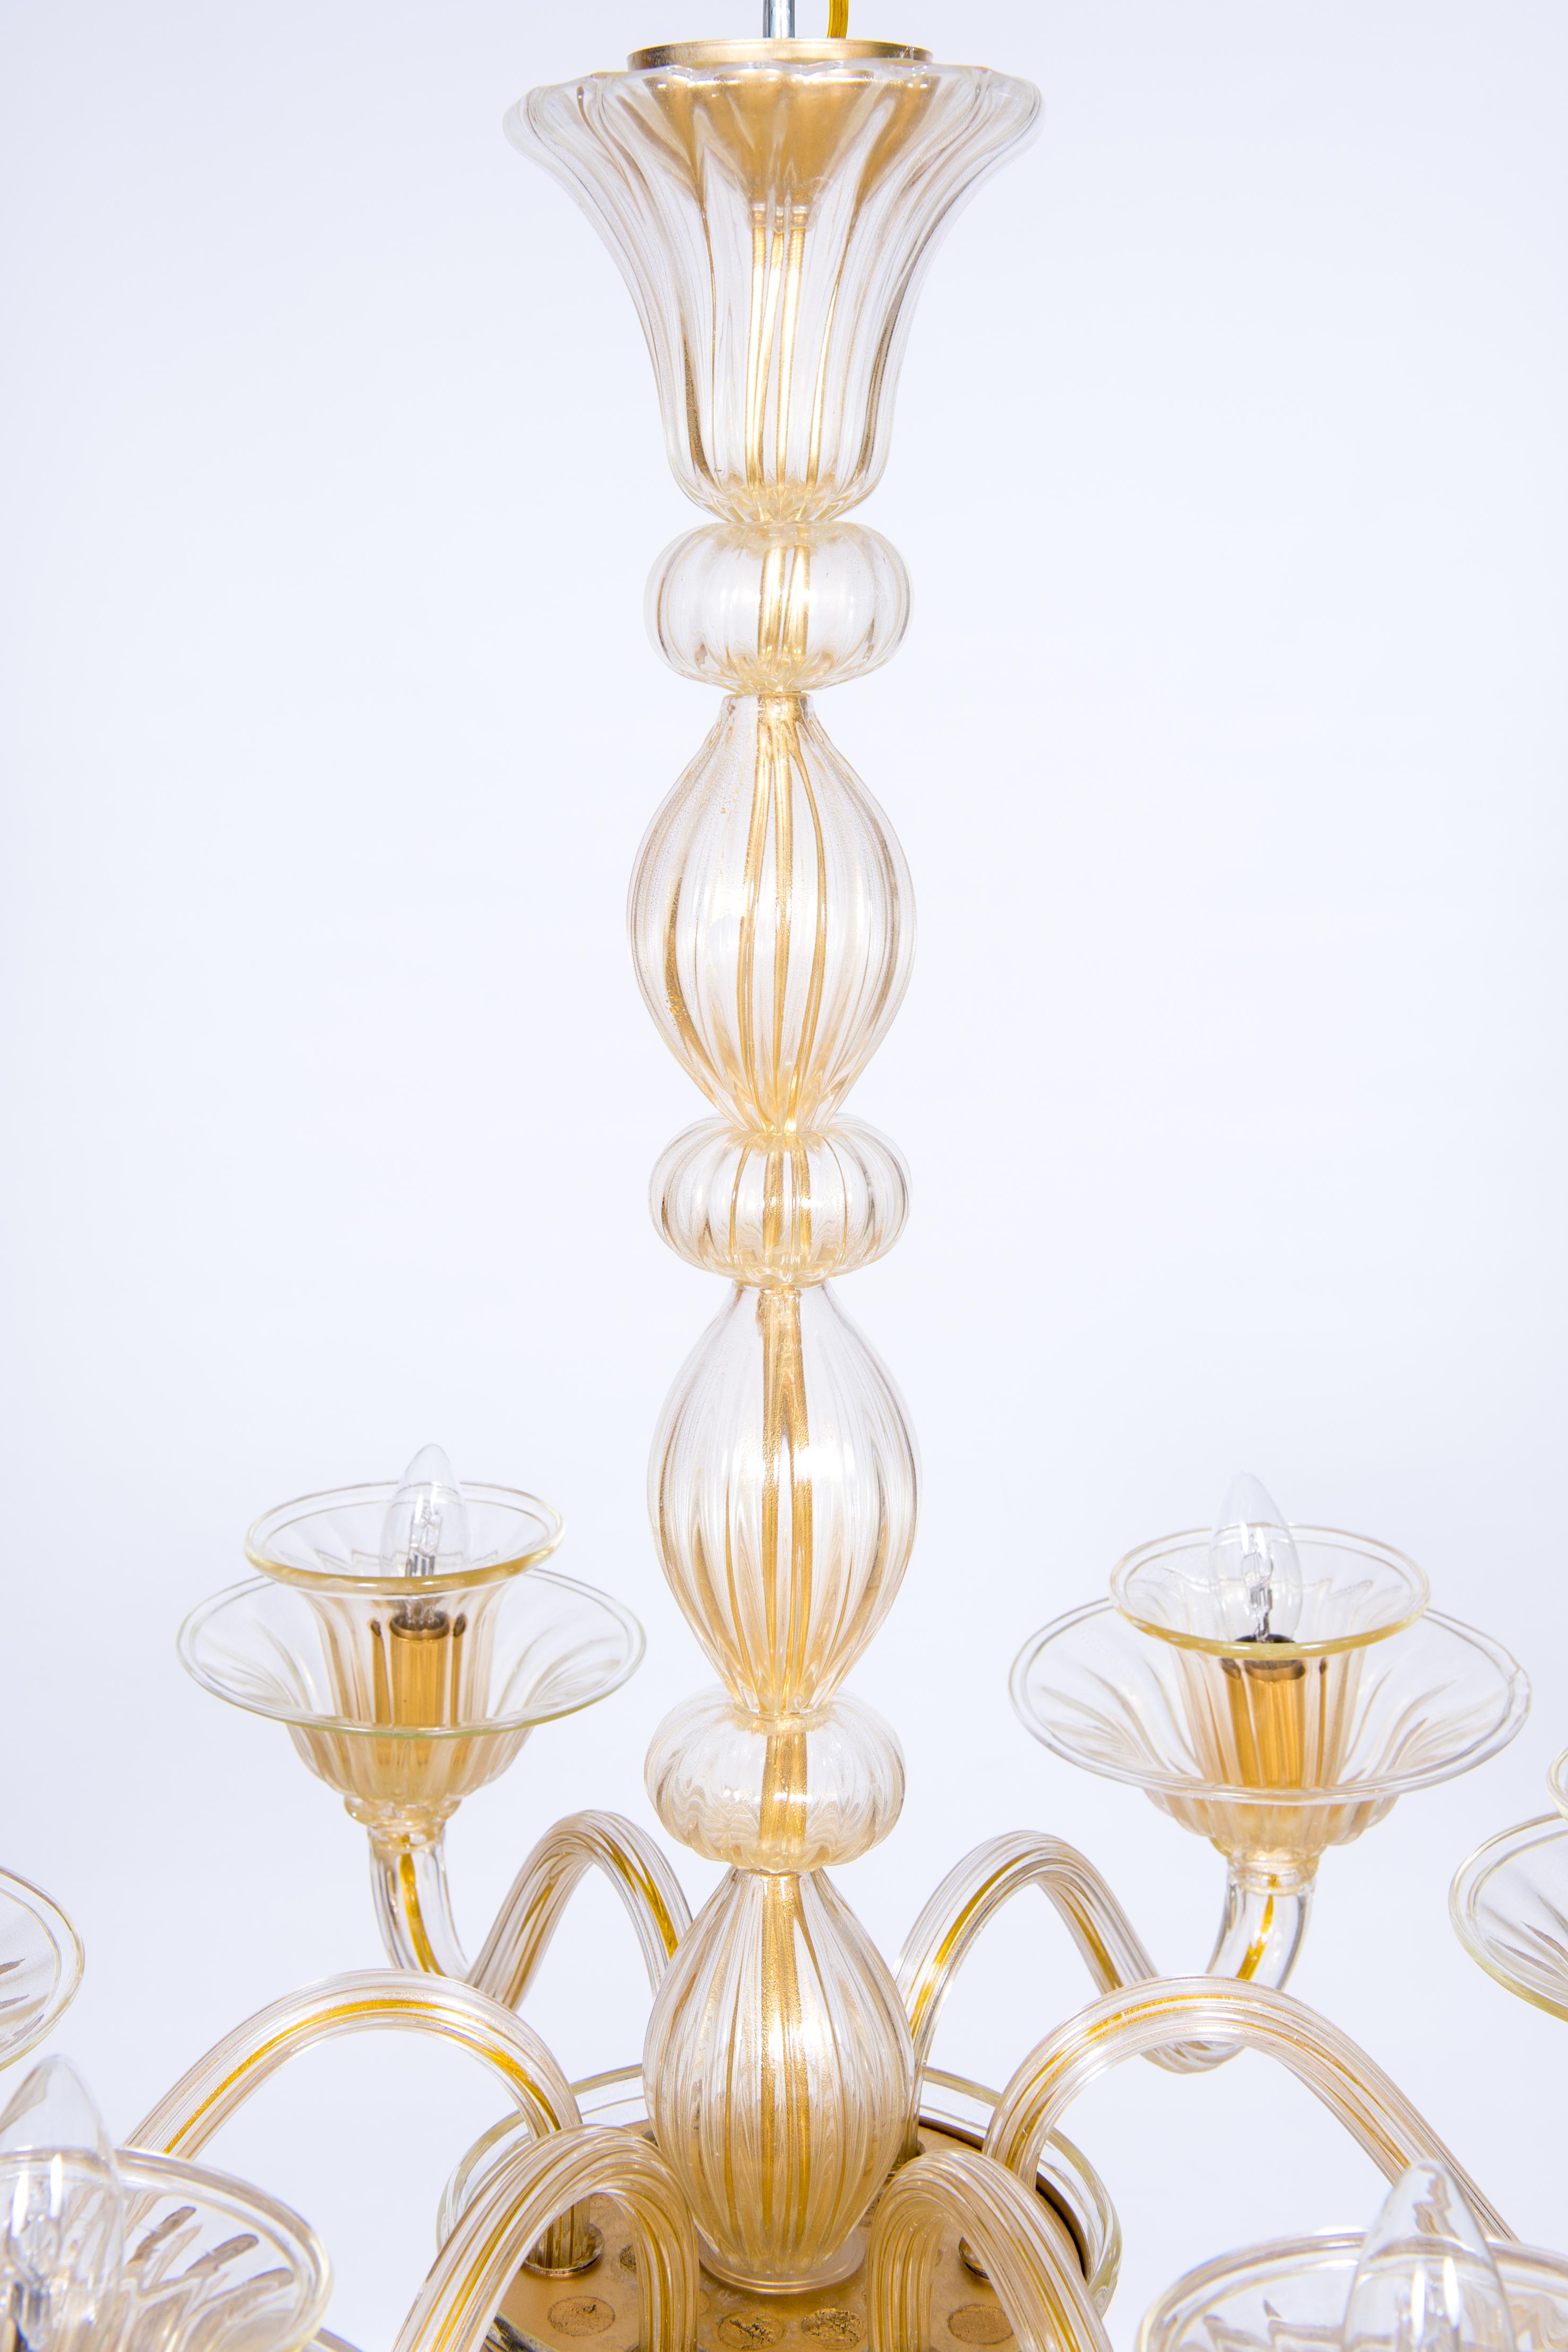 Refined Gold Spheres and round shaped Murano Glass Chandelier Contemporary Italy For Sale 9